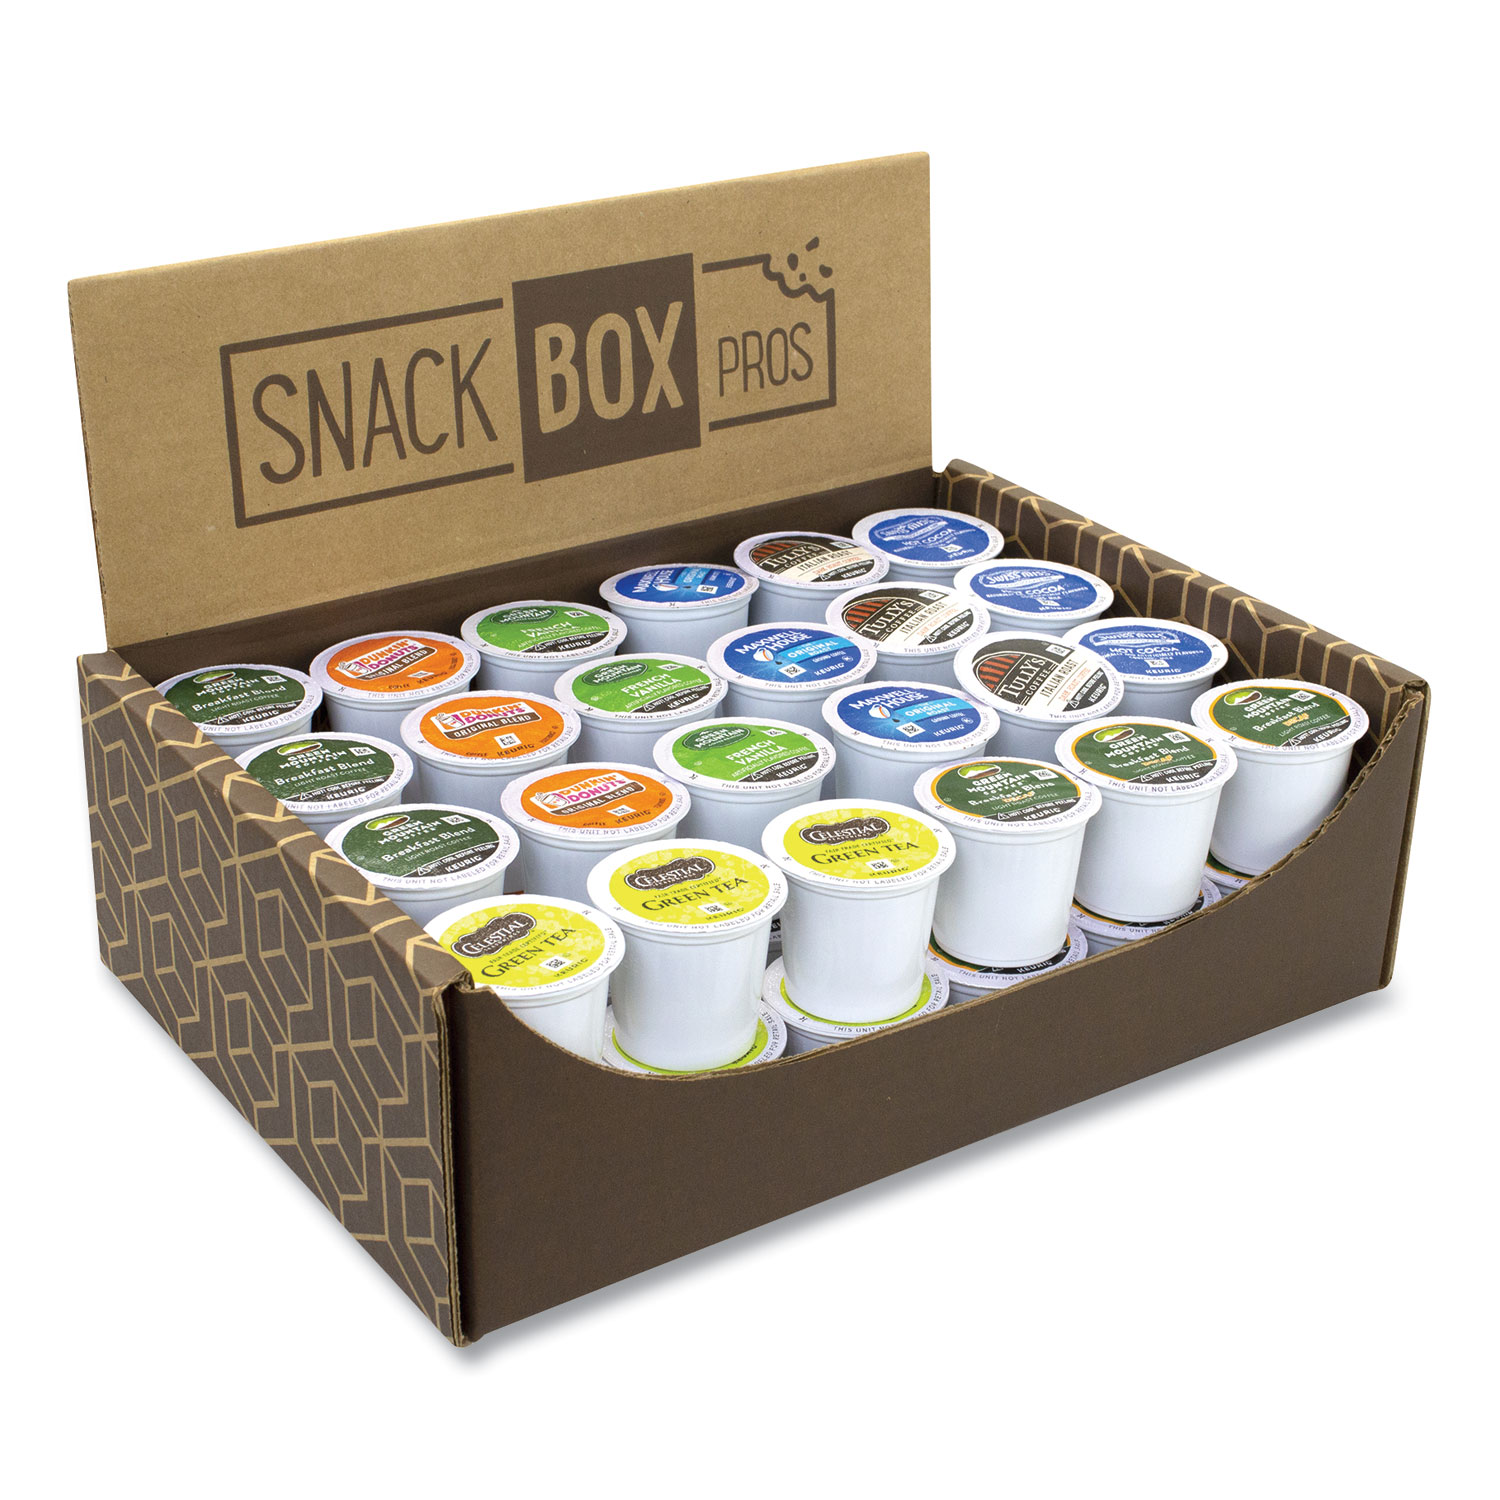  Snack Box Pros 70000040 Something for Everyone K-Cup Assortment, 48/Box, Free Delivery in 1-4 Business Days (GRR70000042) 